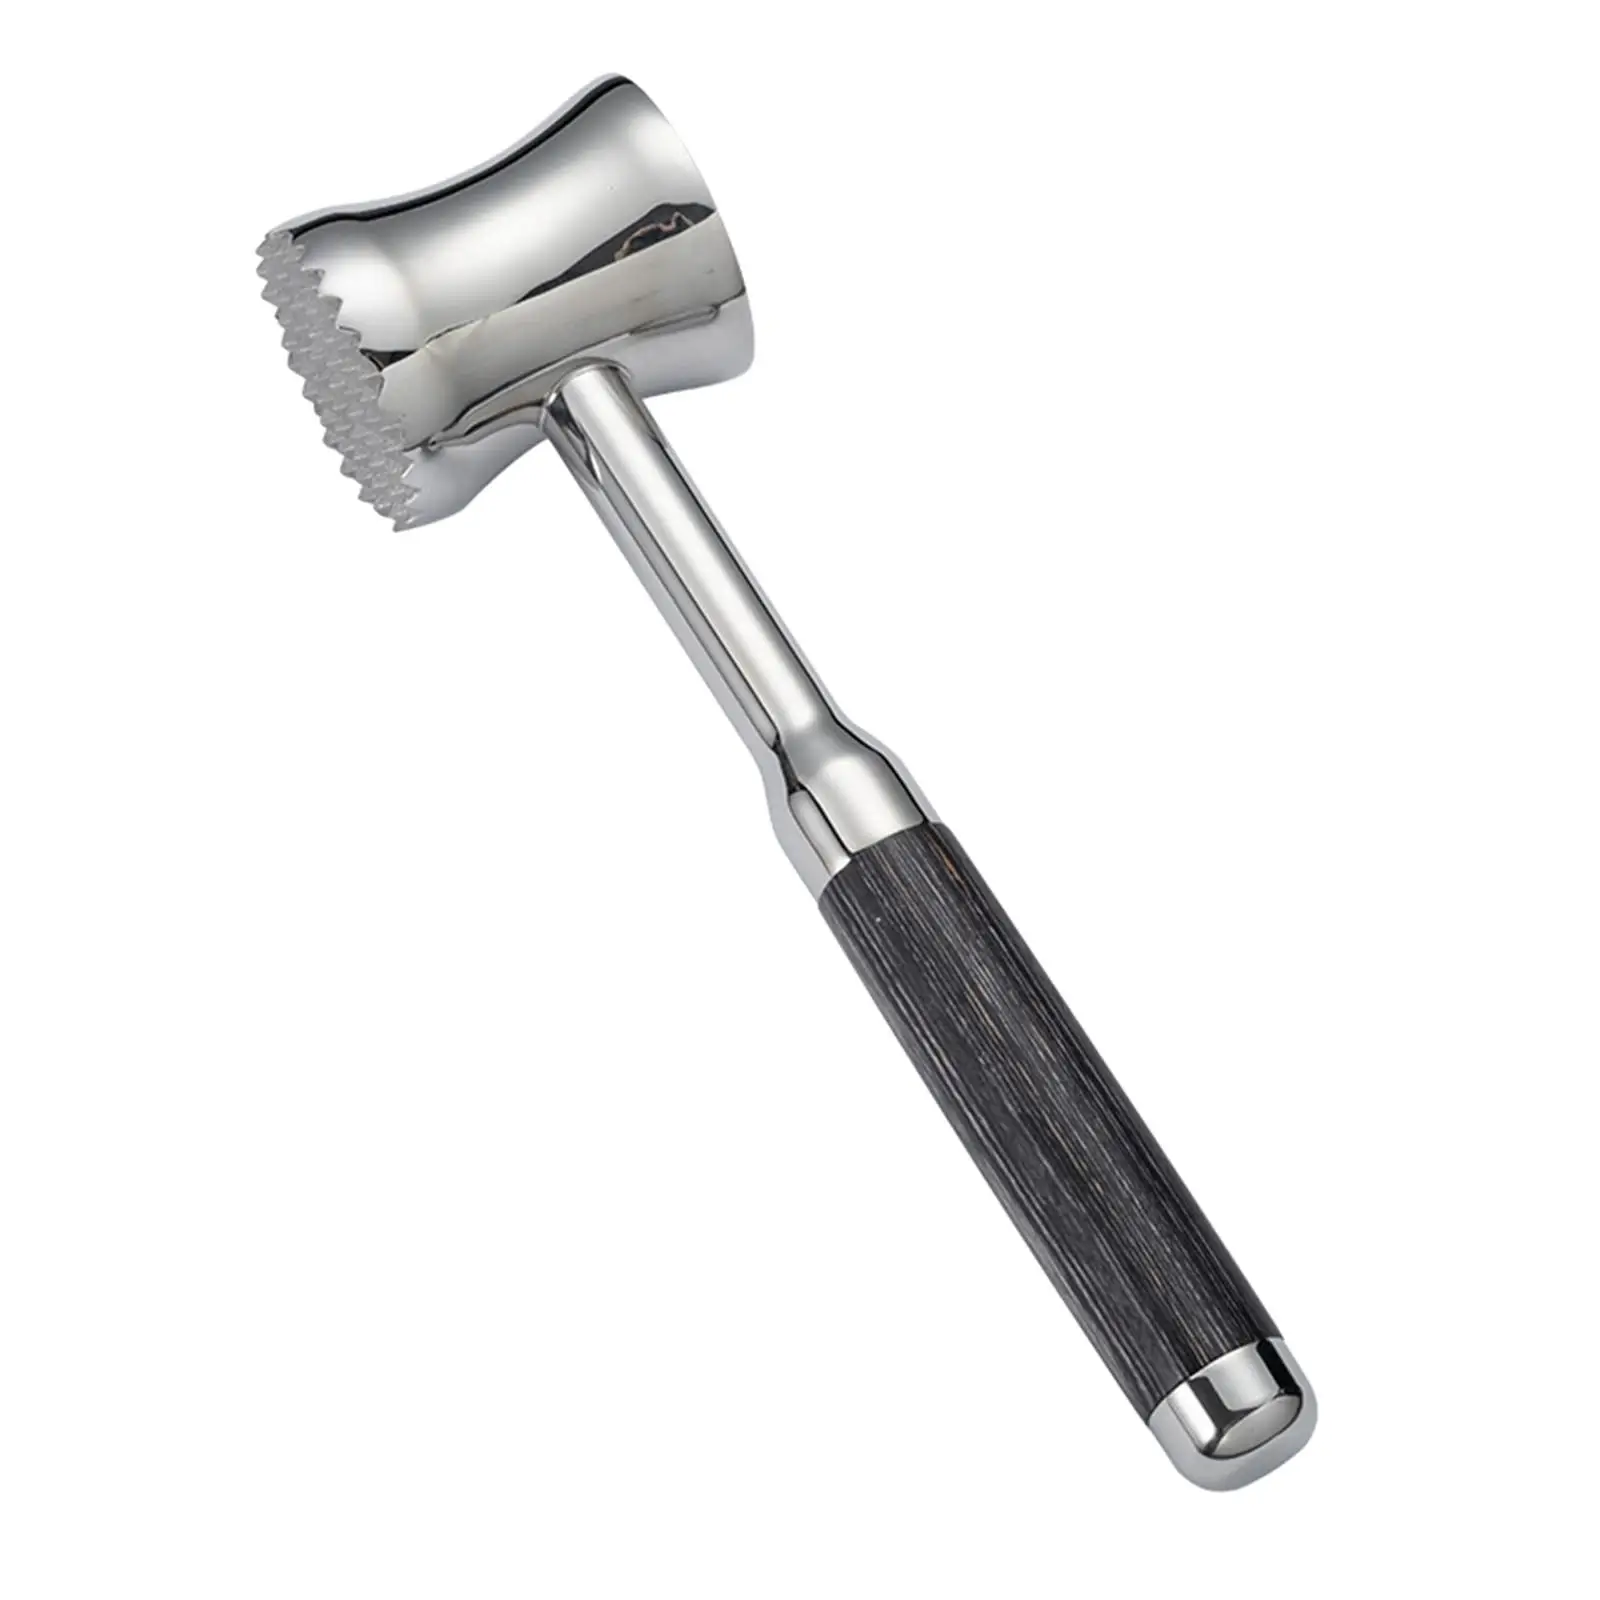 Meat Tenderizer, Meat Mallet, Kitchen Gifts, Comfortable Handle, Meat Beater Multipurpose for Pounding